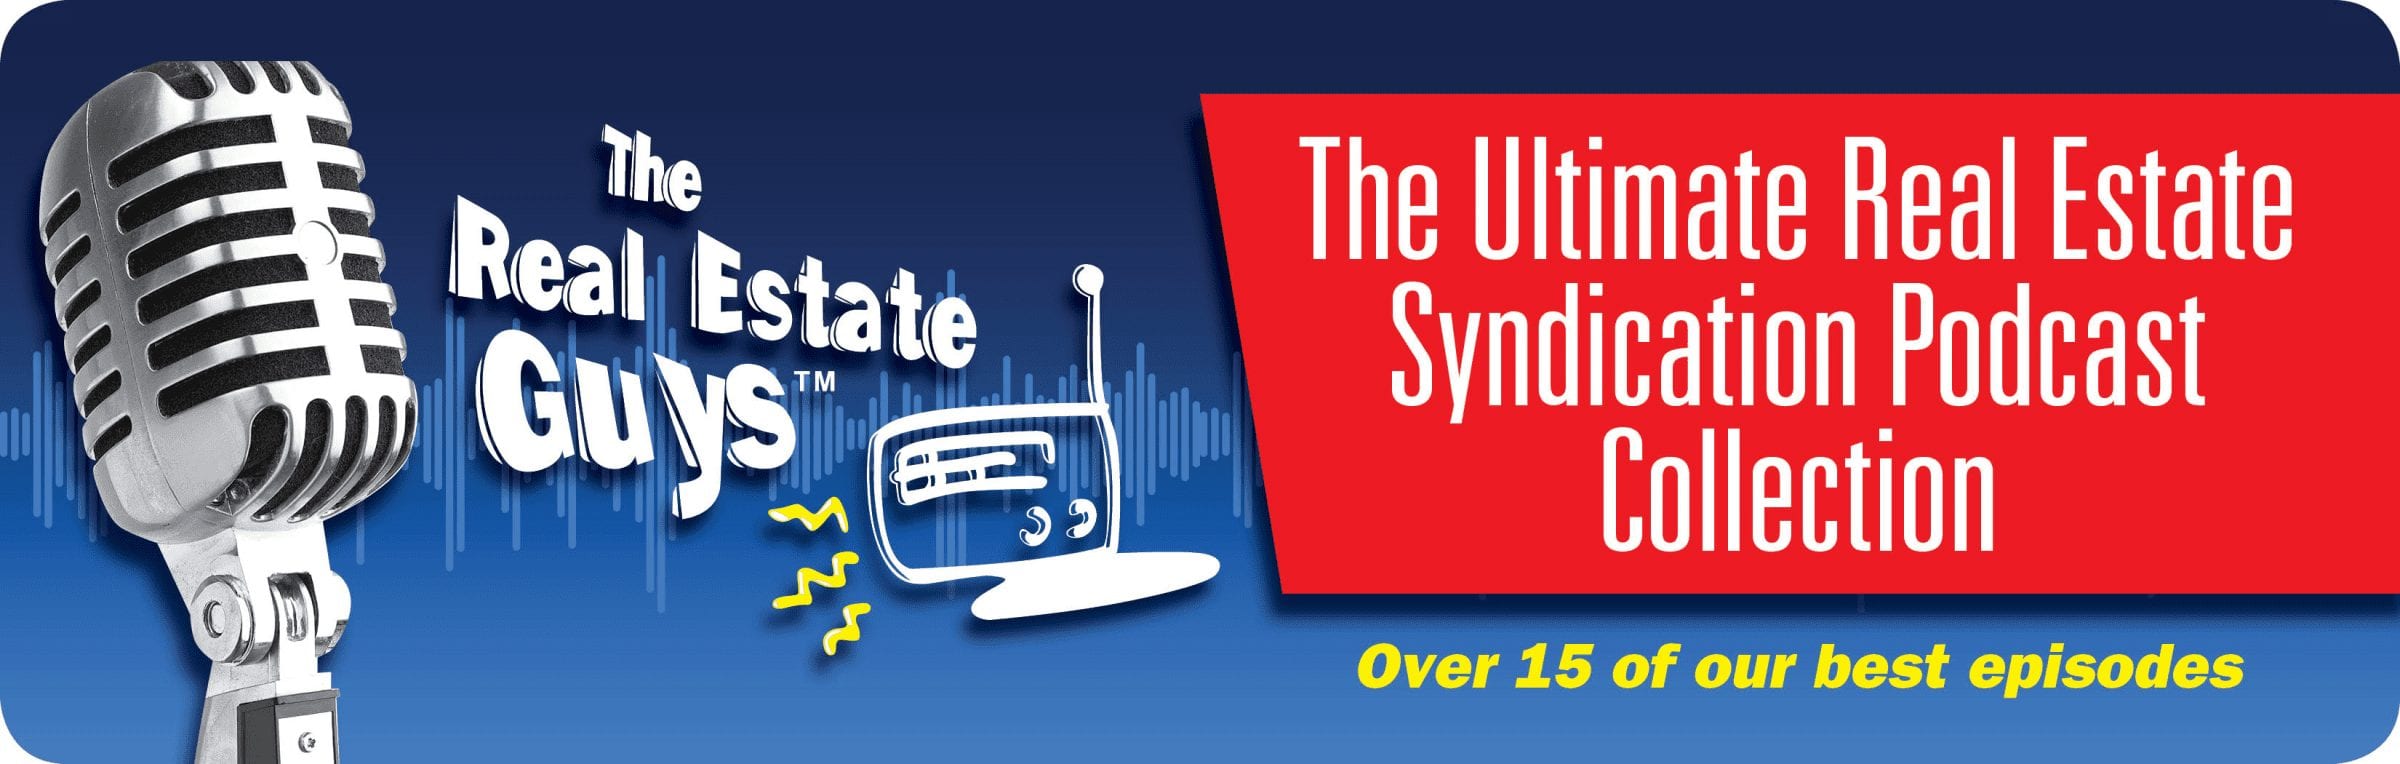 ultimate syndication podcast collection